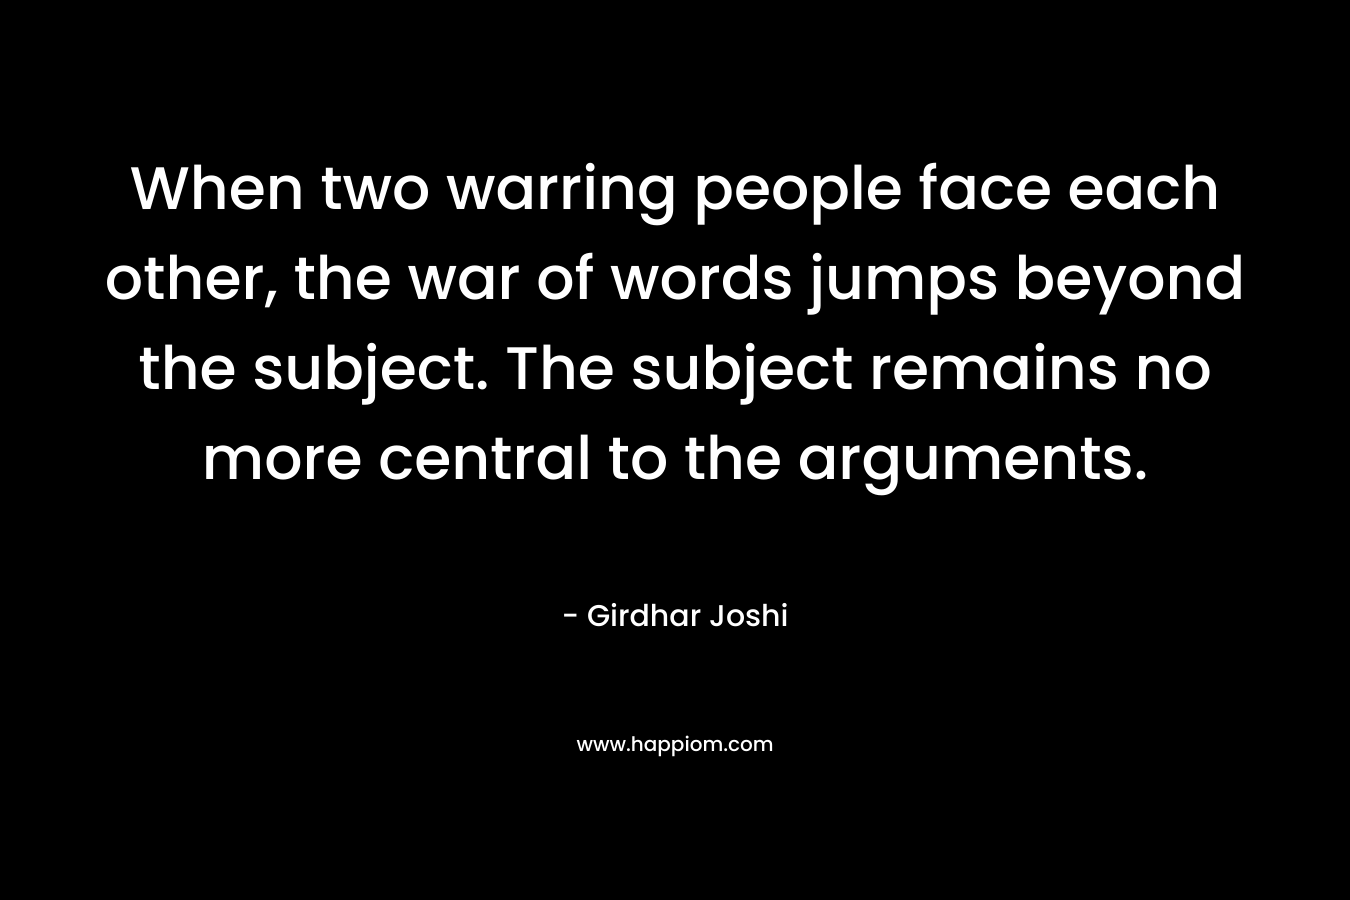 When two warring people face each other, the war of words jumps beyond the subject. The subject remains no more central to the arguments.